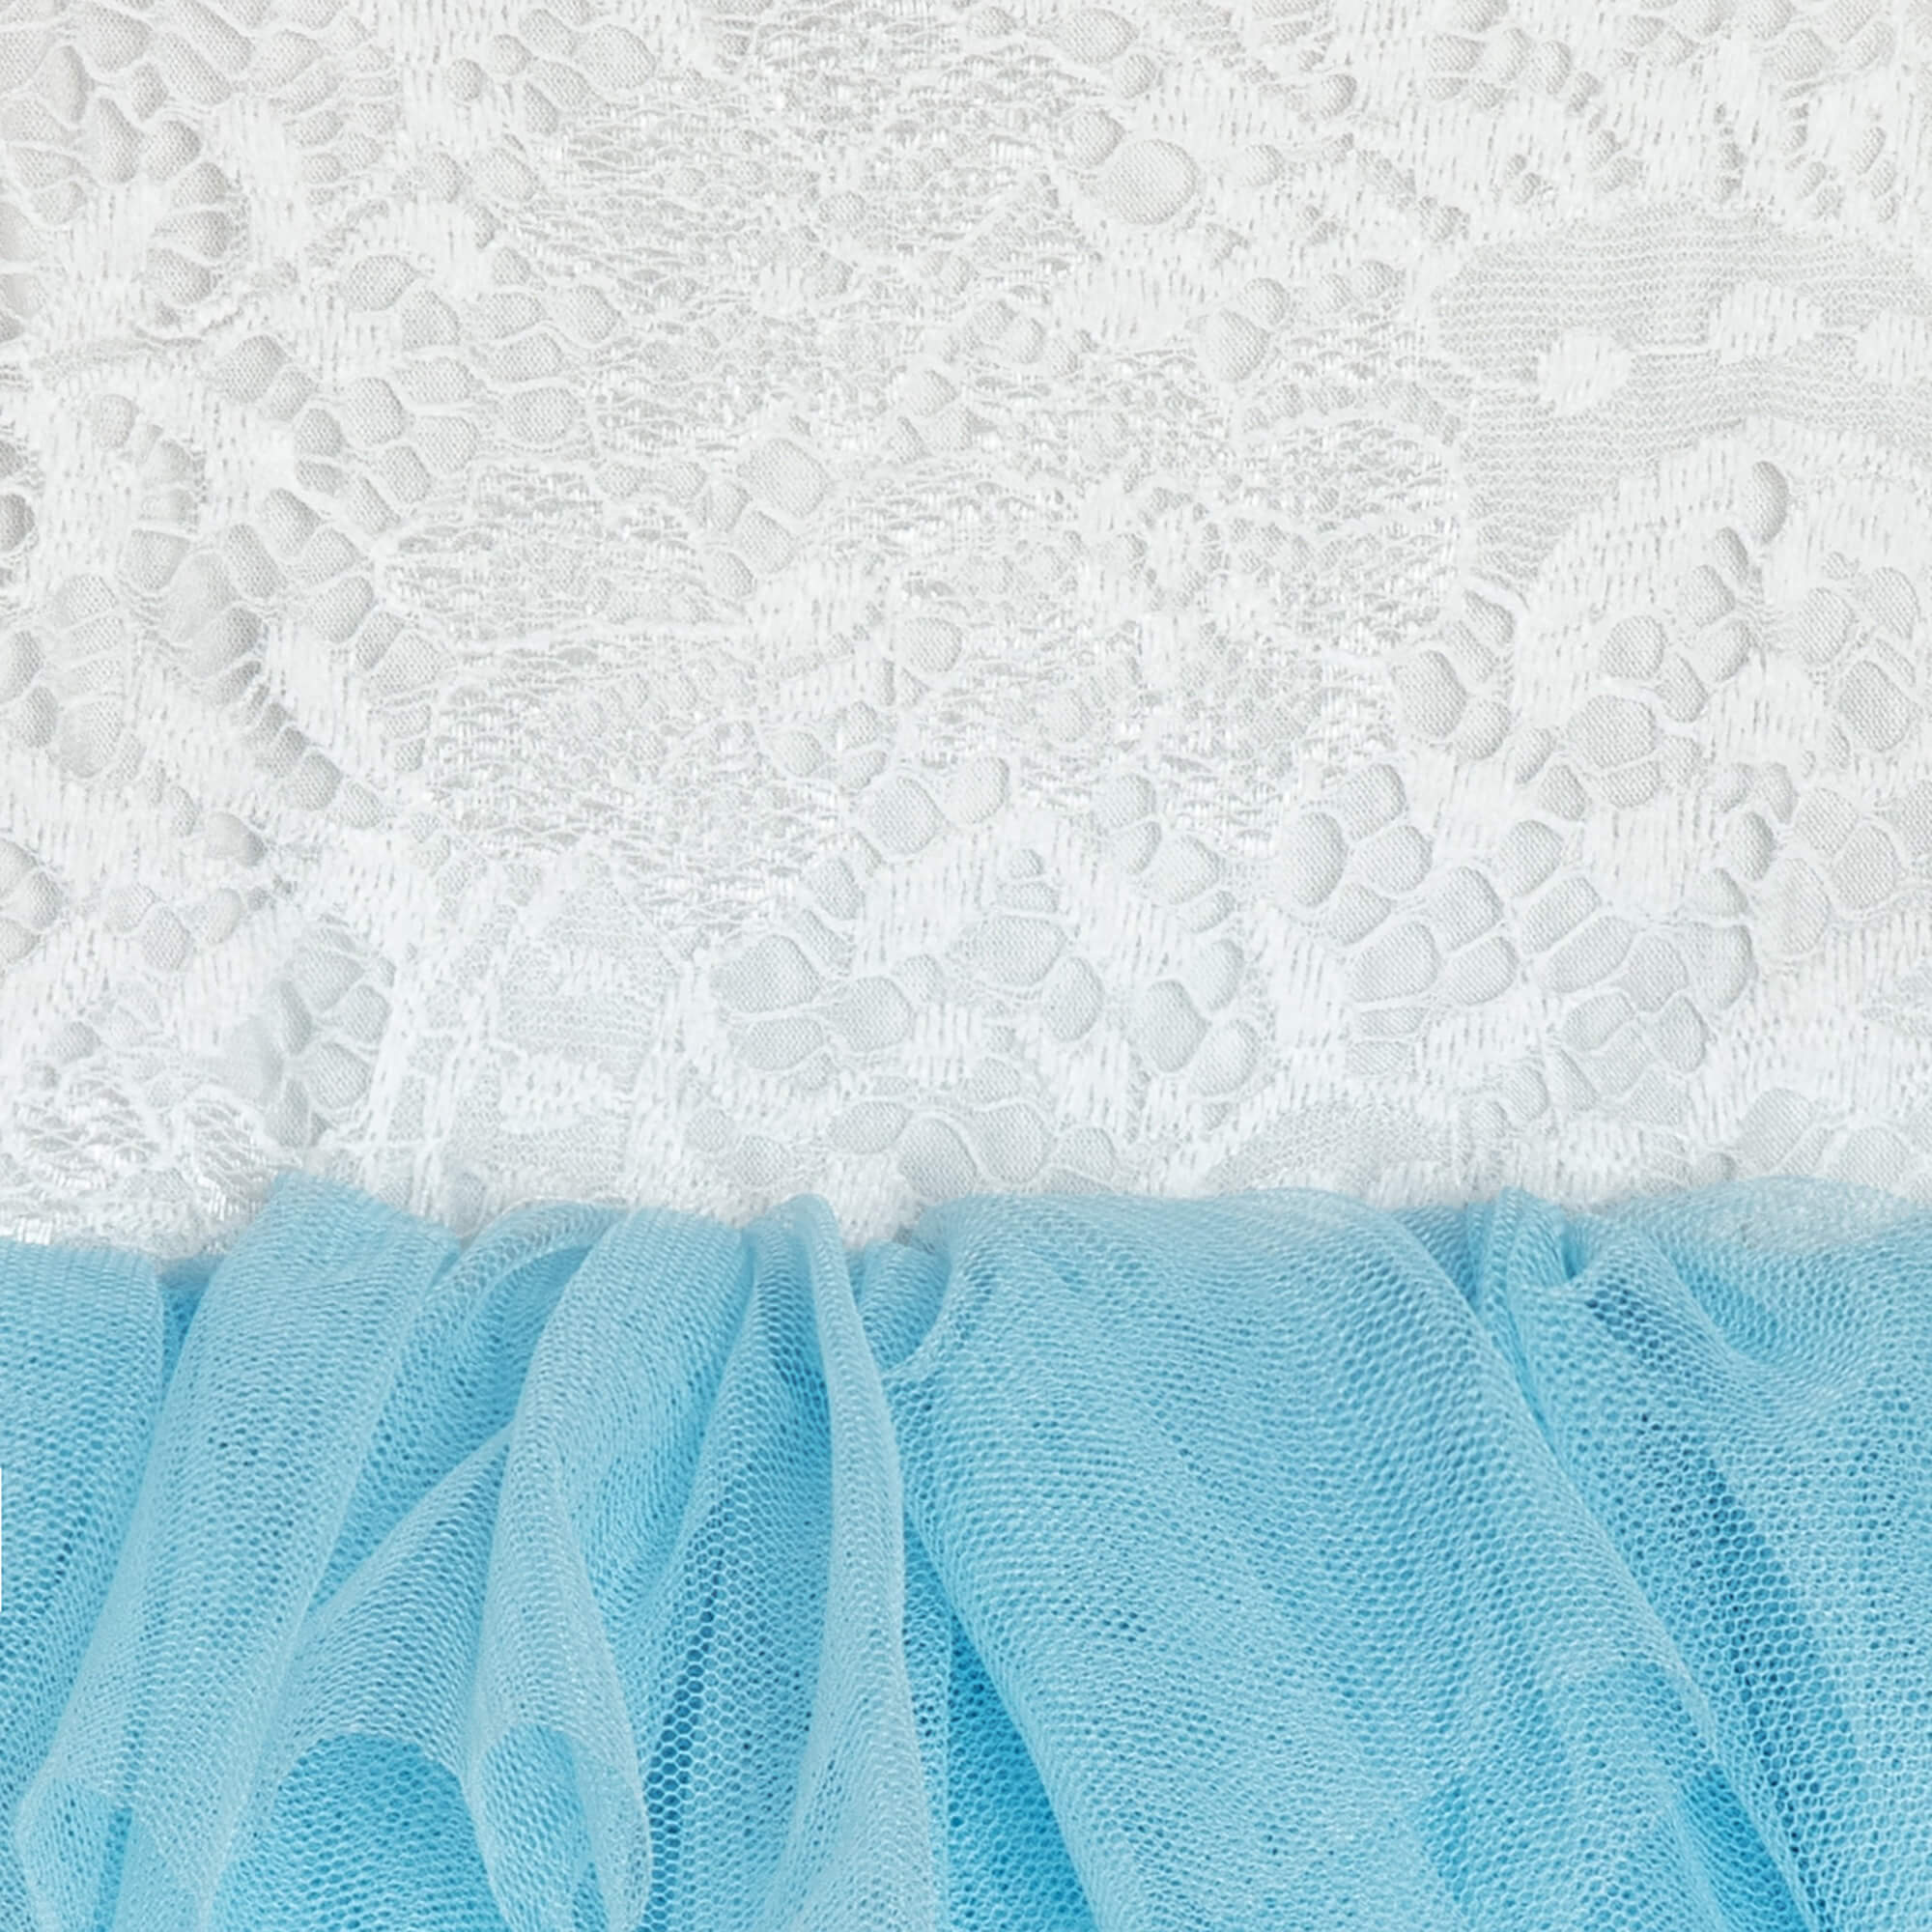 Lace and sky blue tulle shade